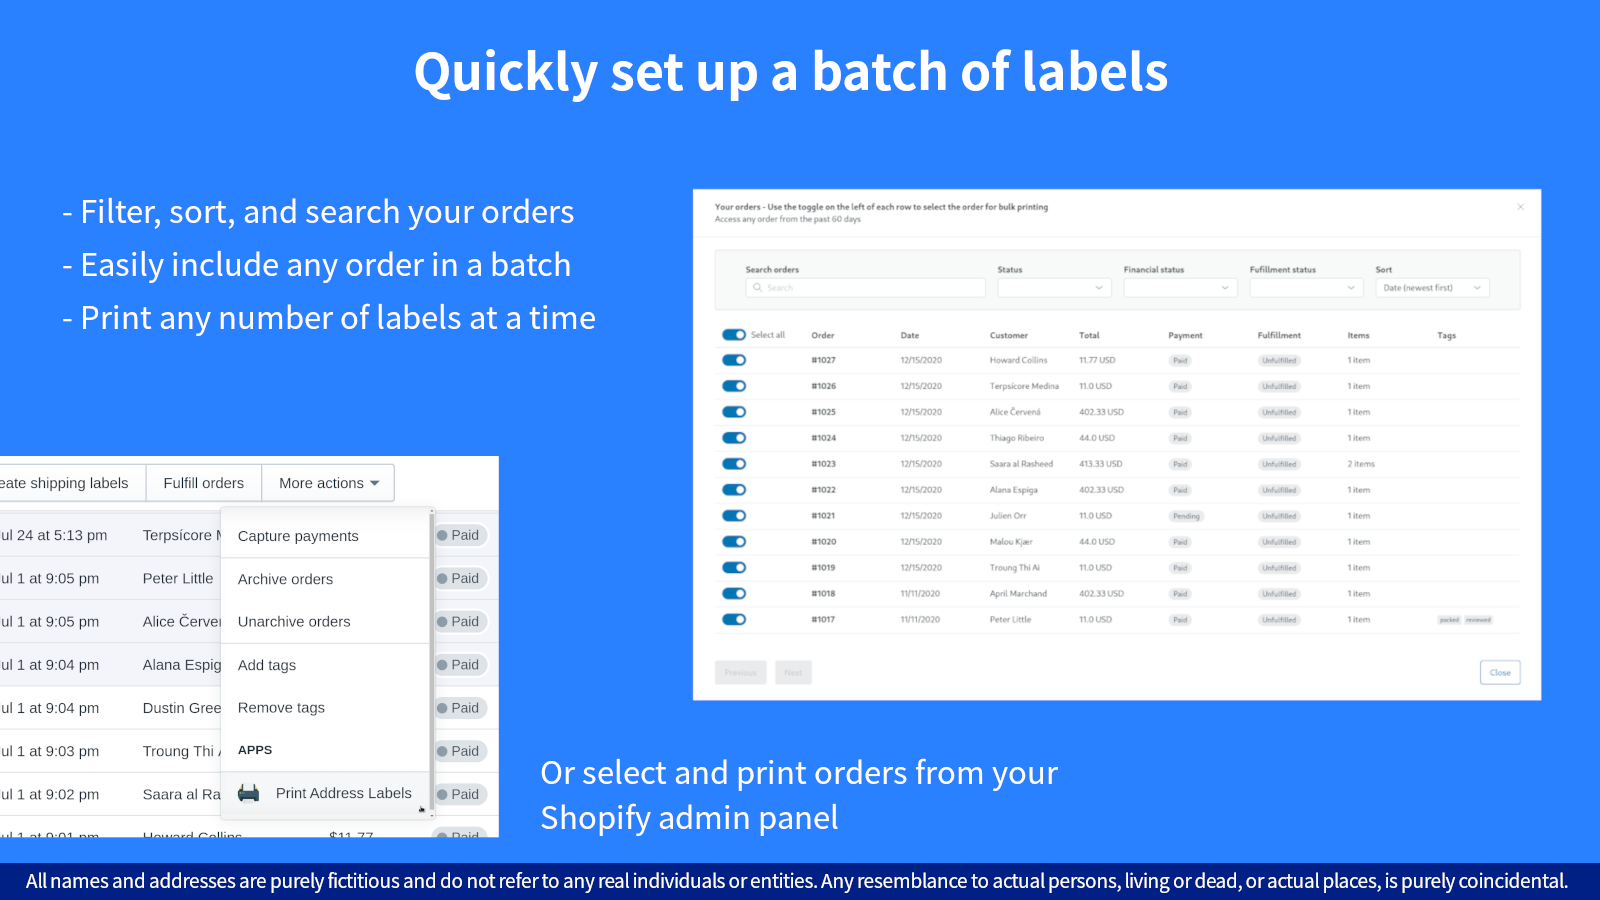 Quickly set up a batch of labels